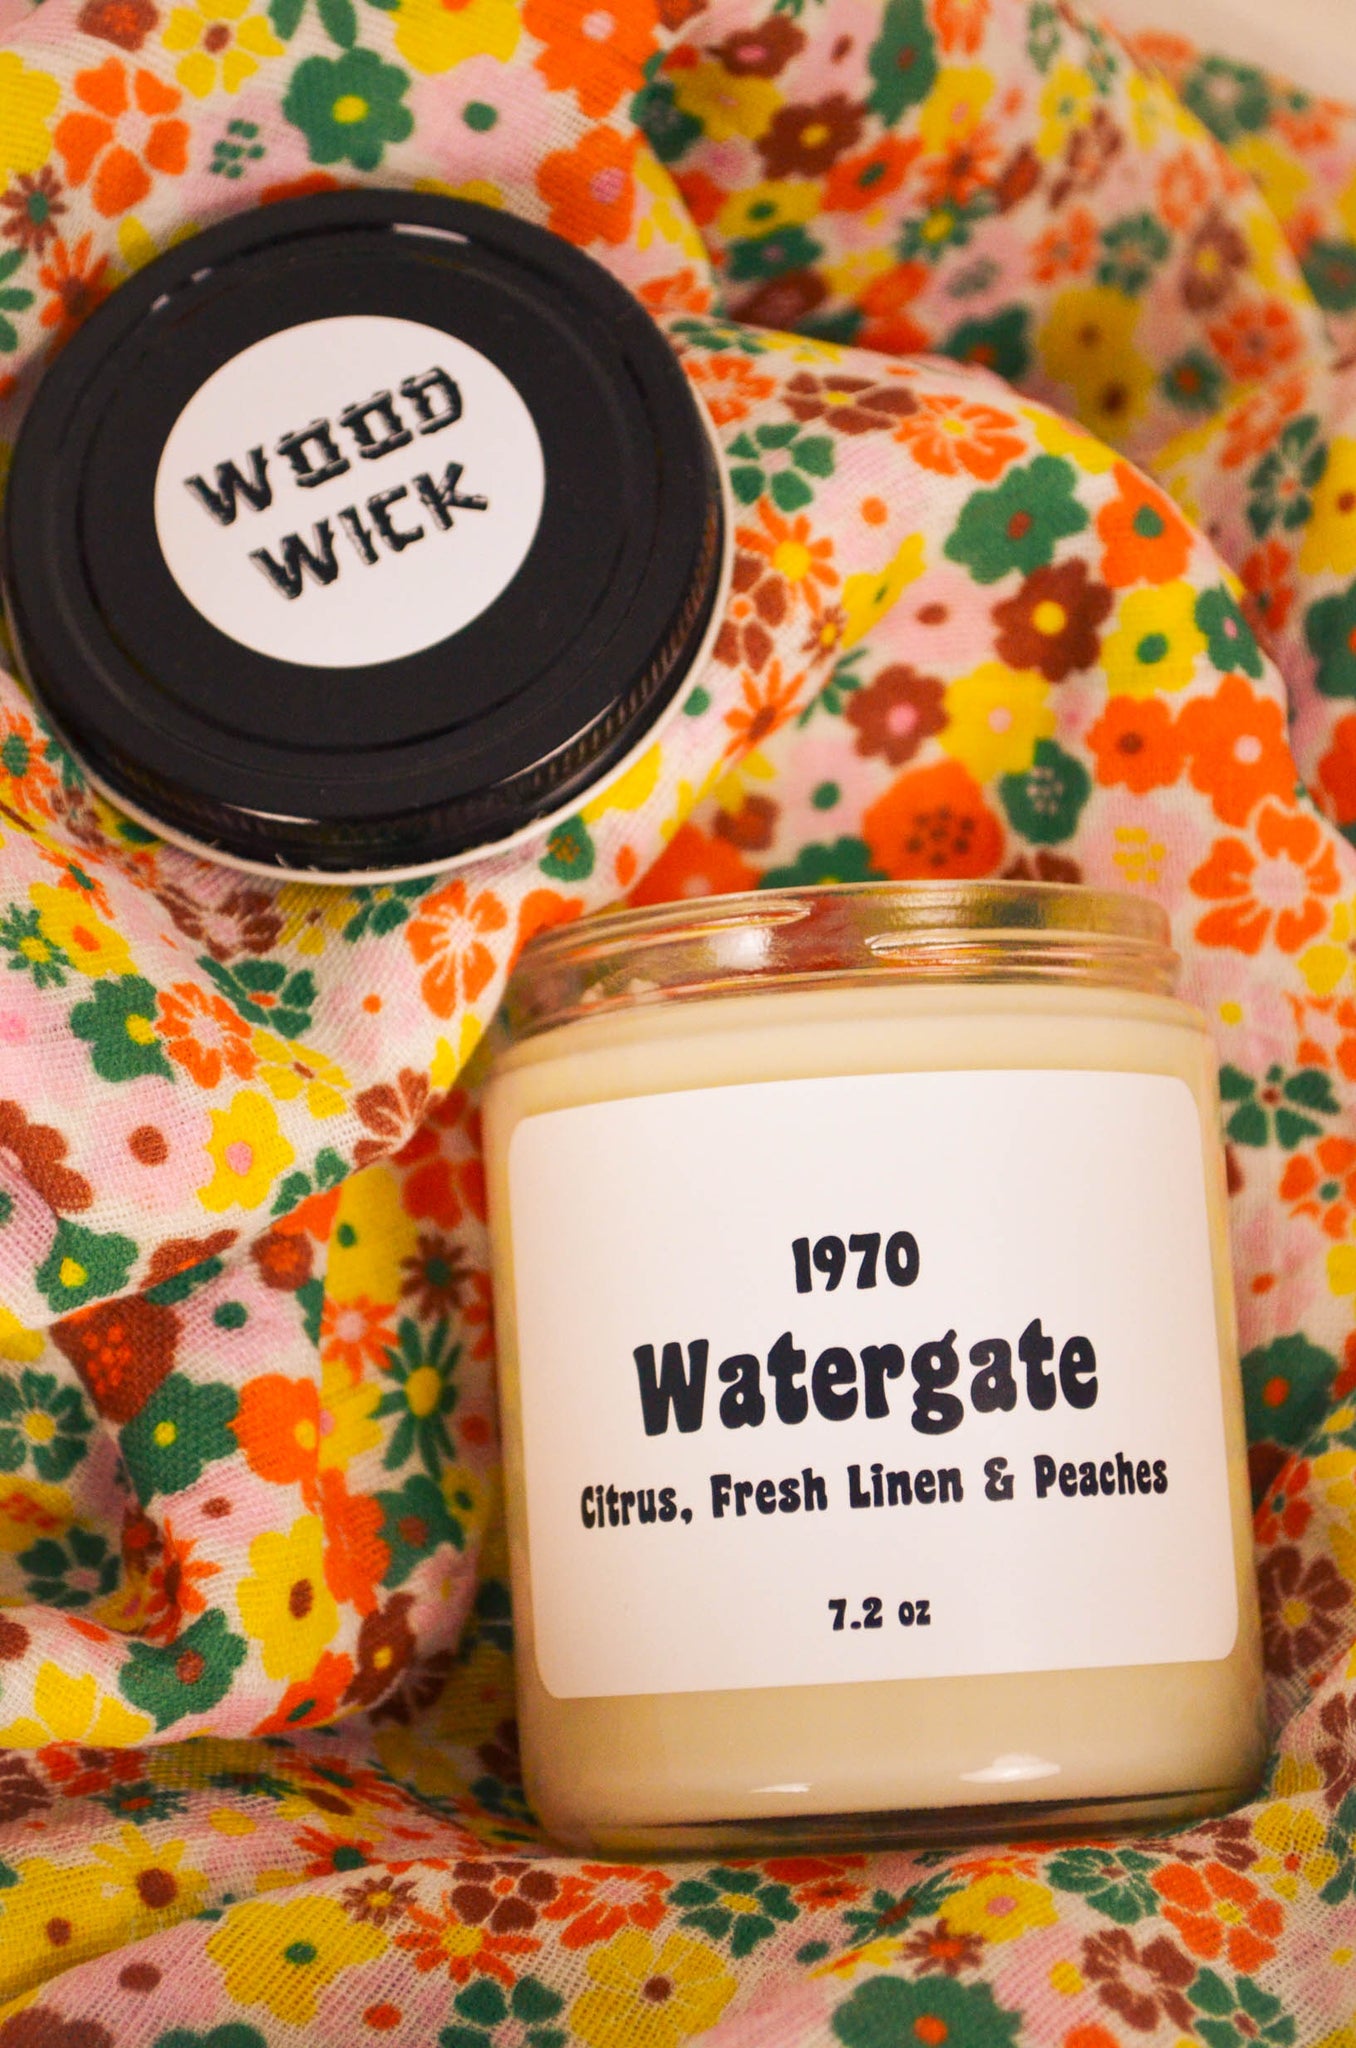 Watergate Wood Wick Scented Soy Candle 7.2 oz